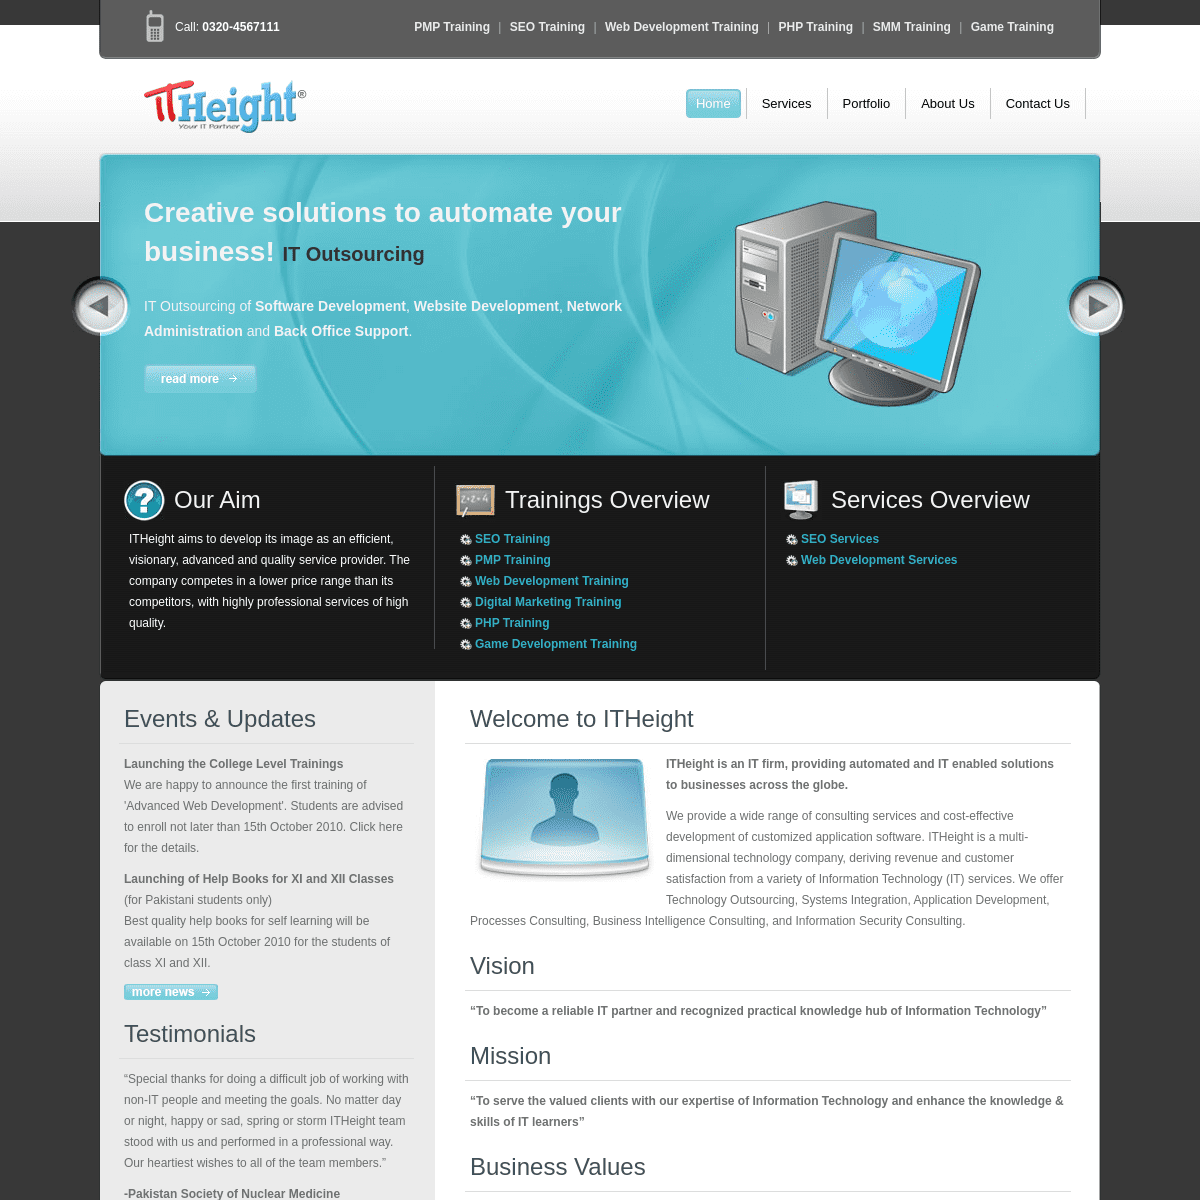 A complete backup of itheight.com